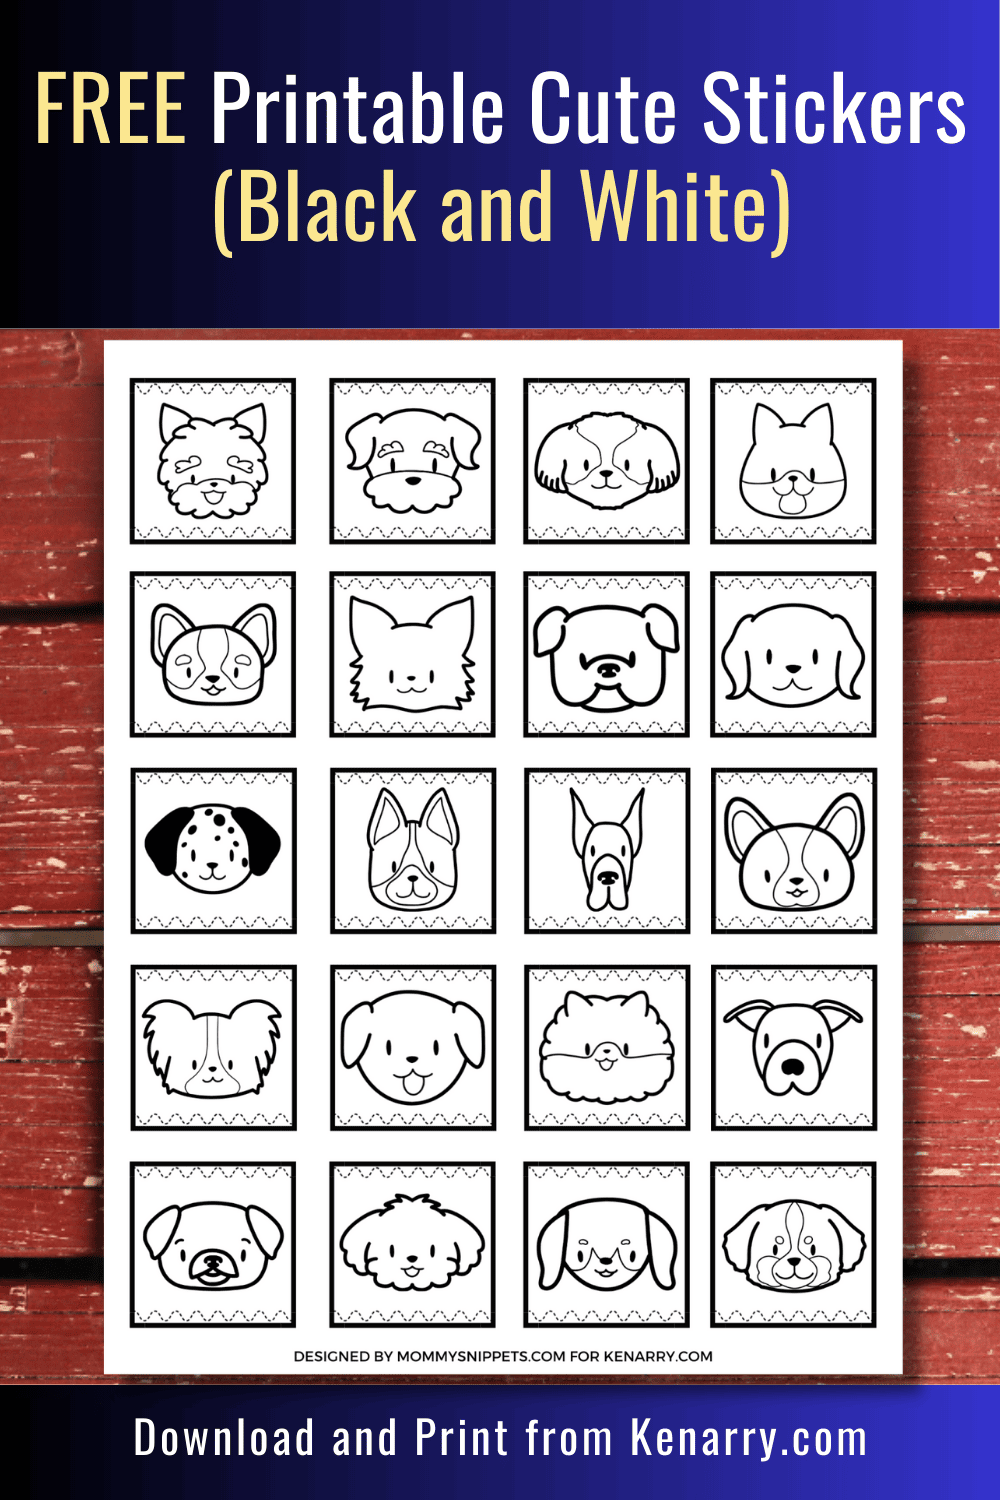 FREE Printable Cute Stickers
(Black and White)